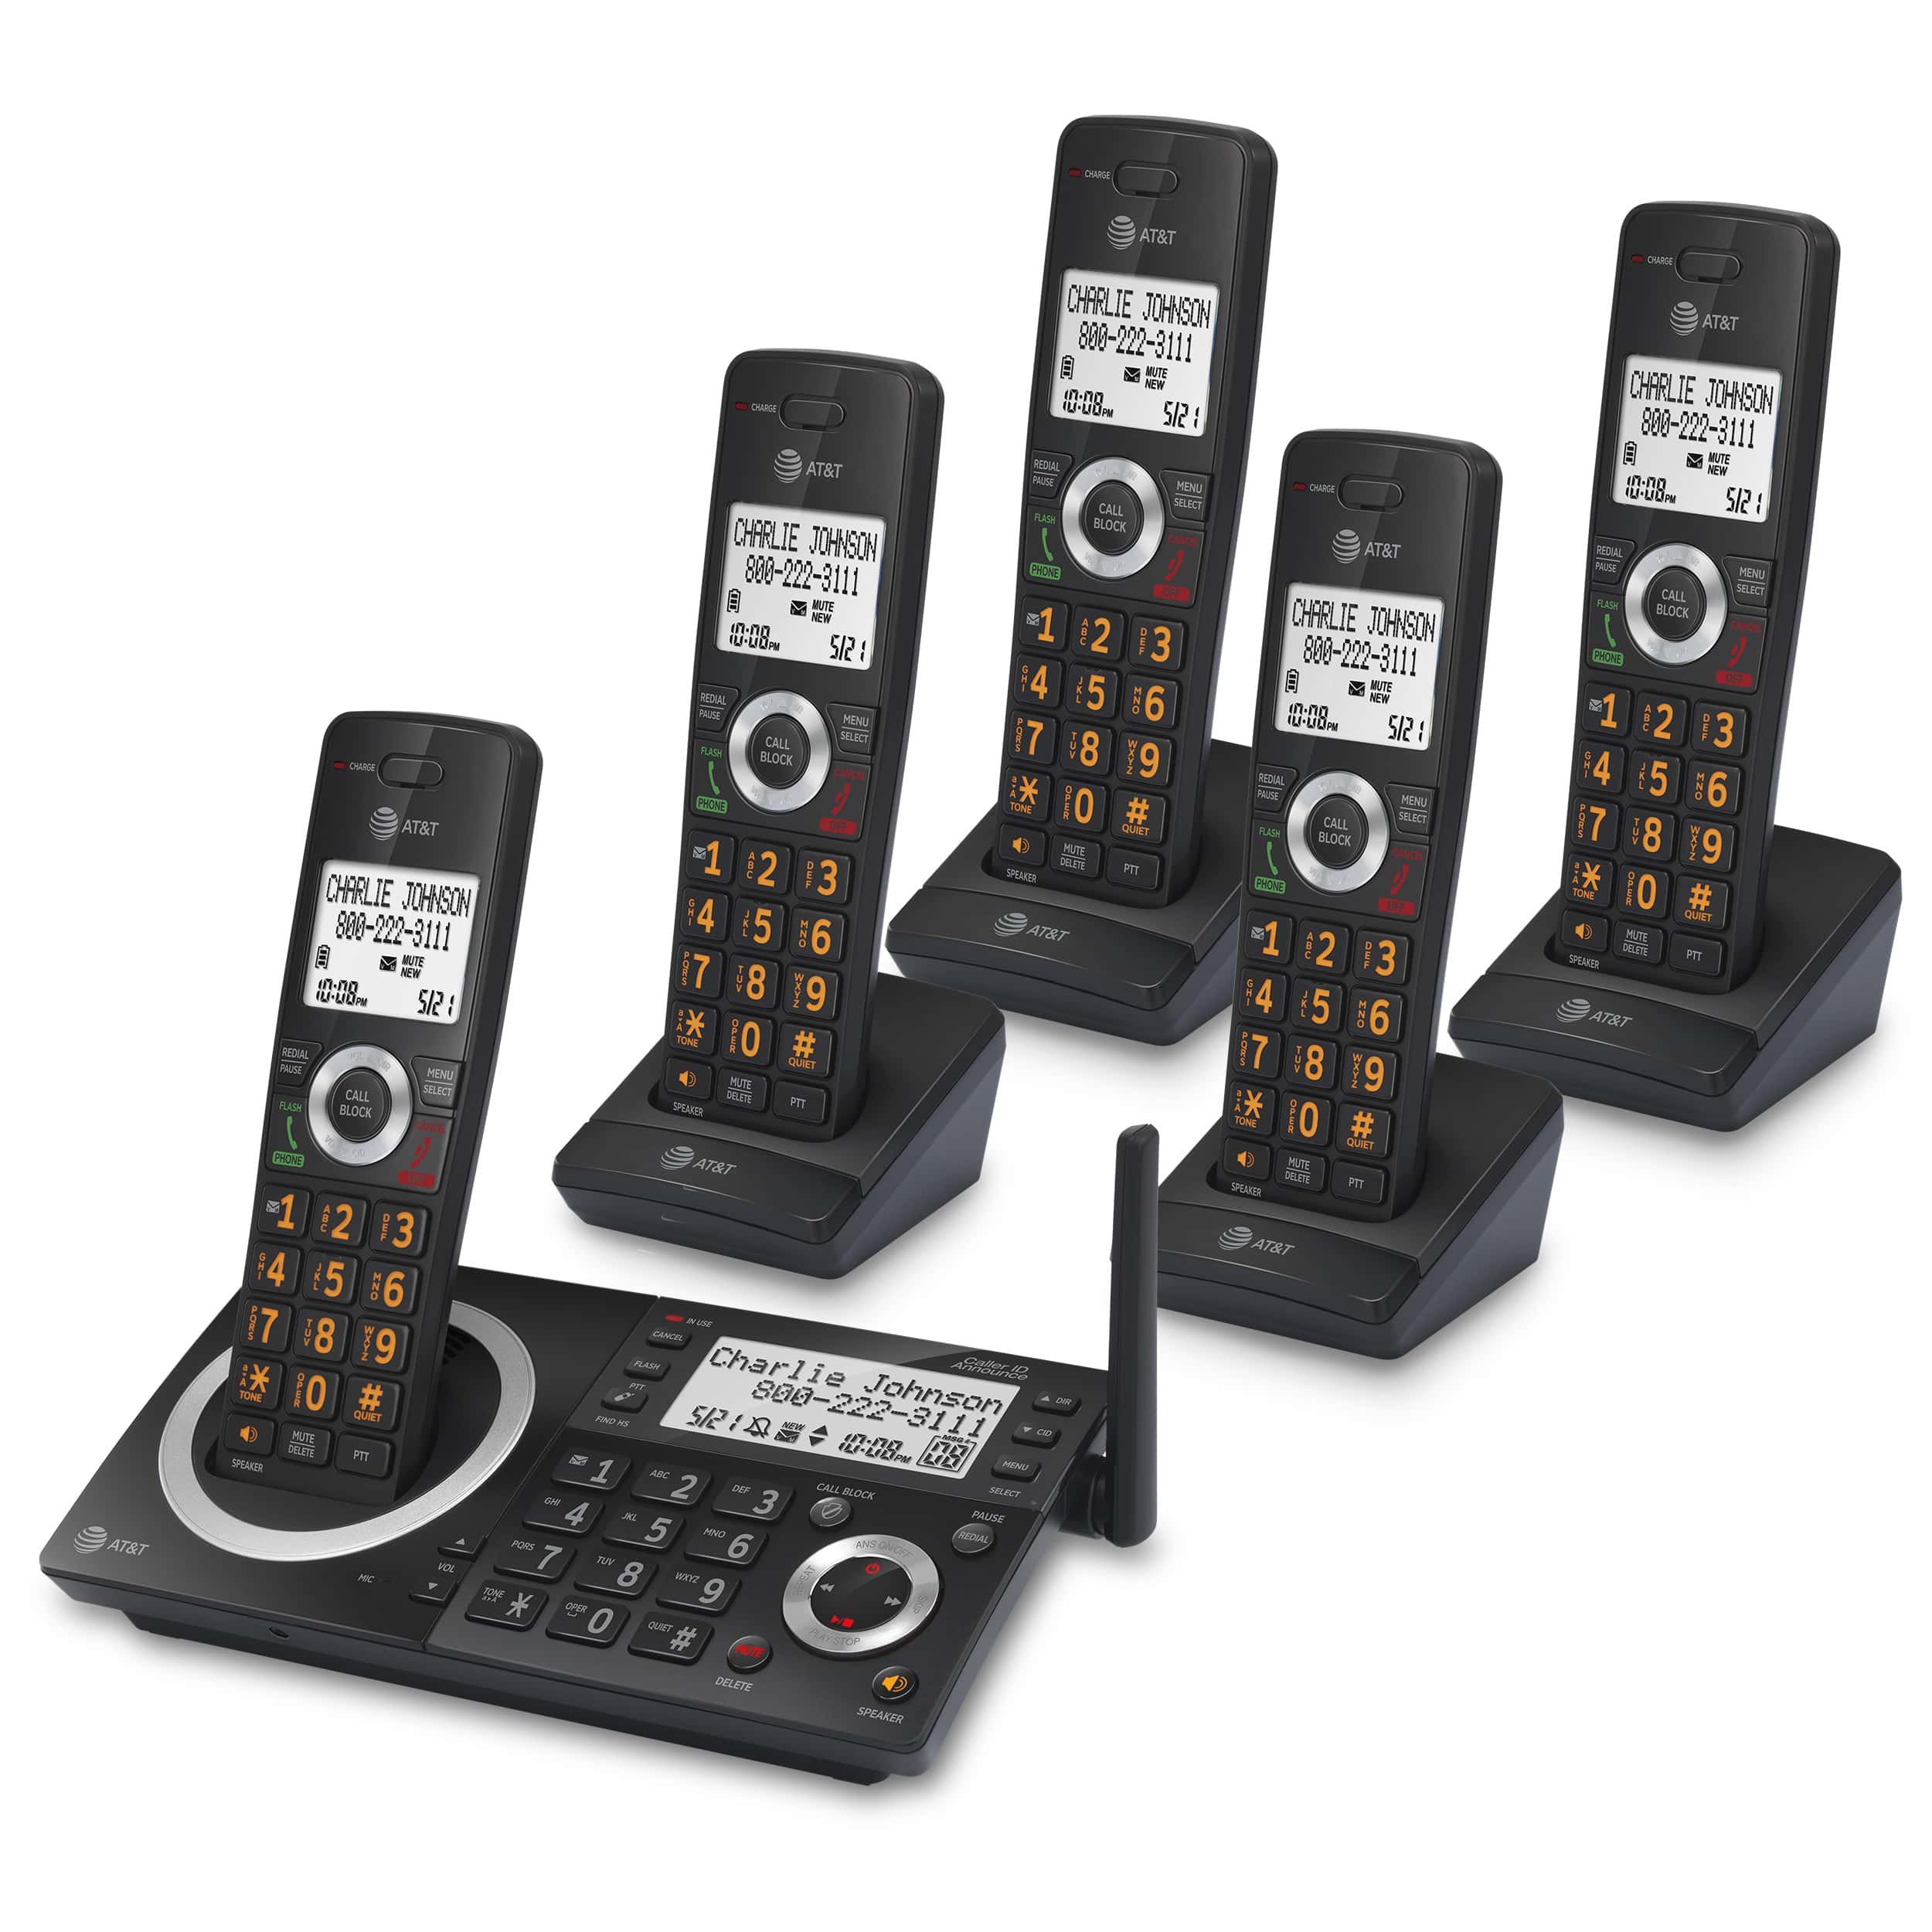 5-Handset Expandable Cordless Phone with Unsurpassed Range, Smart Call Blocker, Dual Keypad and Display, and Answering System - view 2